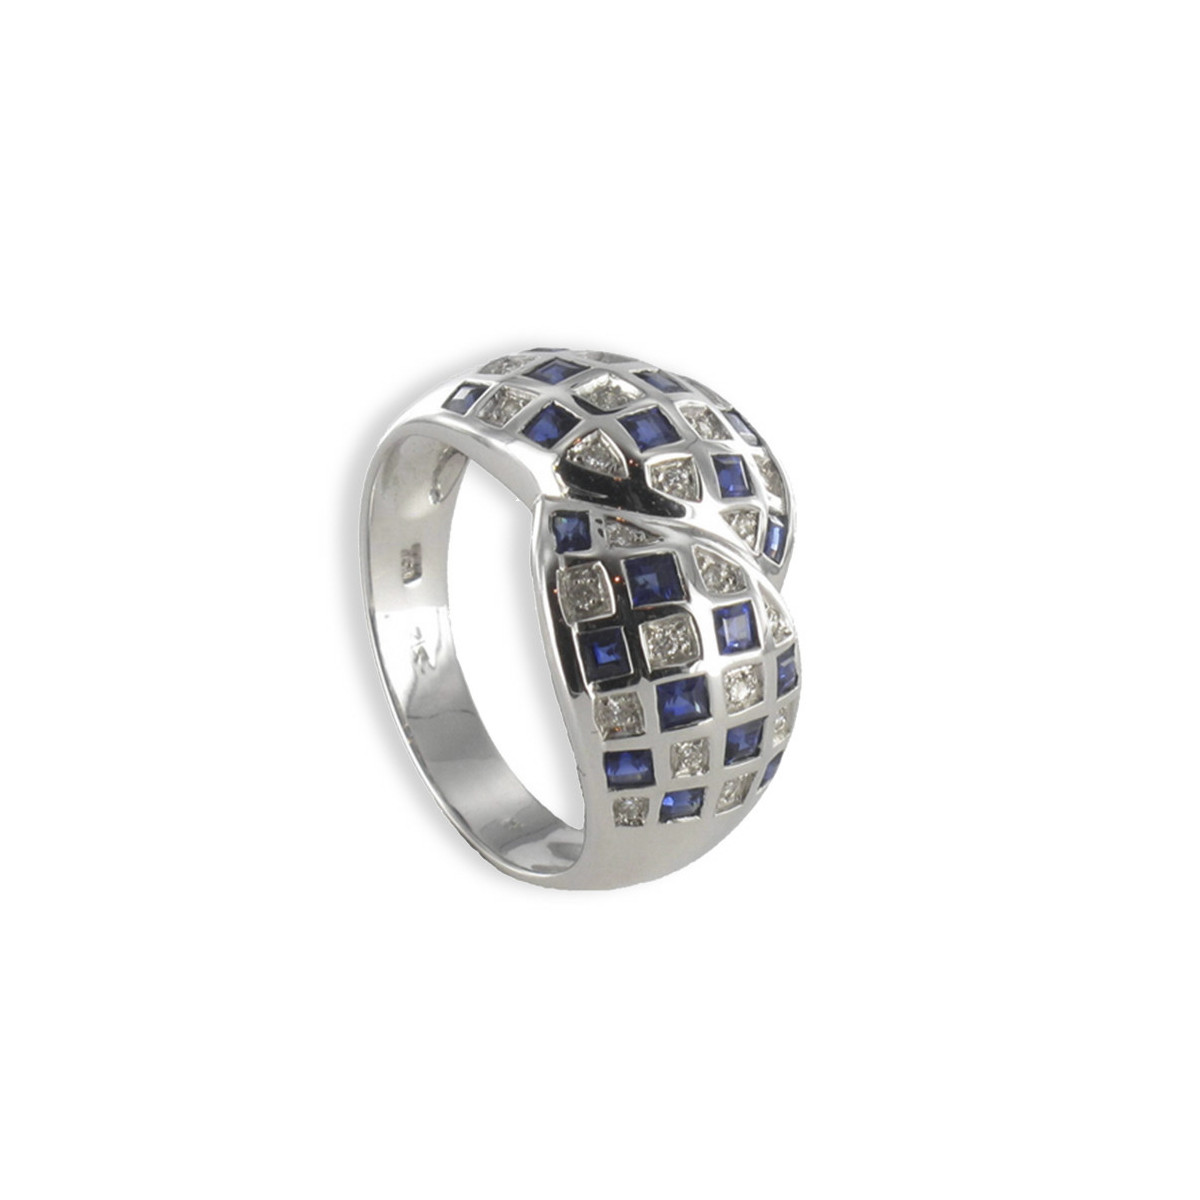 GOLD RING DIAMONDS AND SQUARE SAPPHIRES